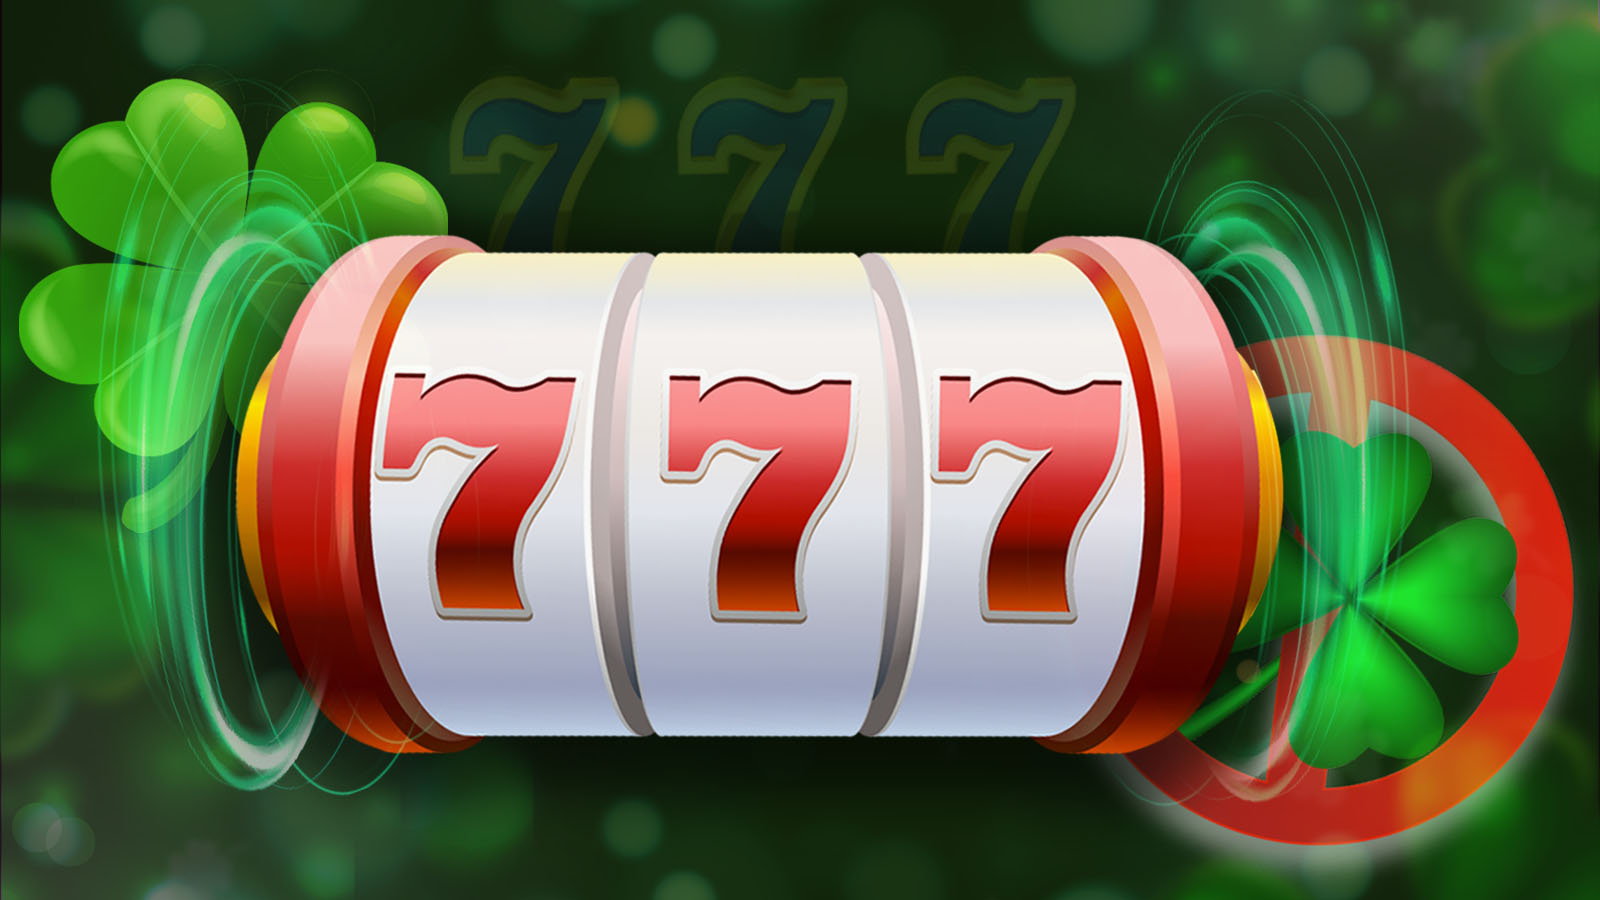 Is 777 Lucky or Unlucky? The Symbolism of No. 7